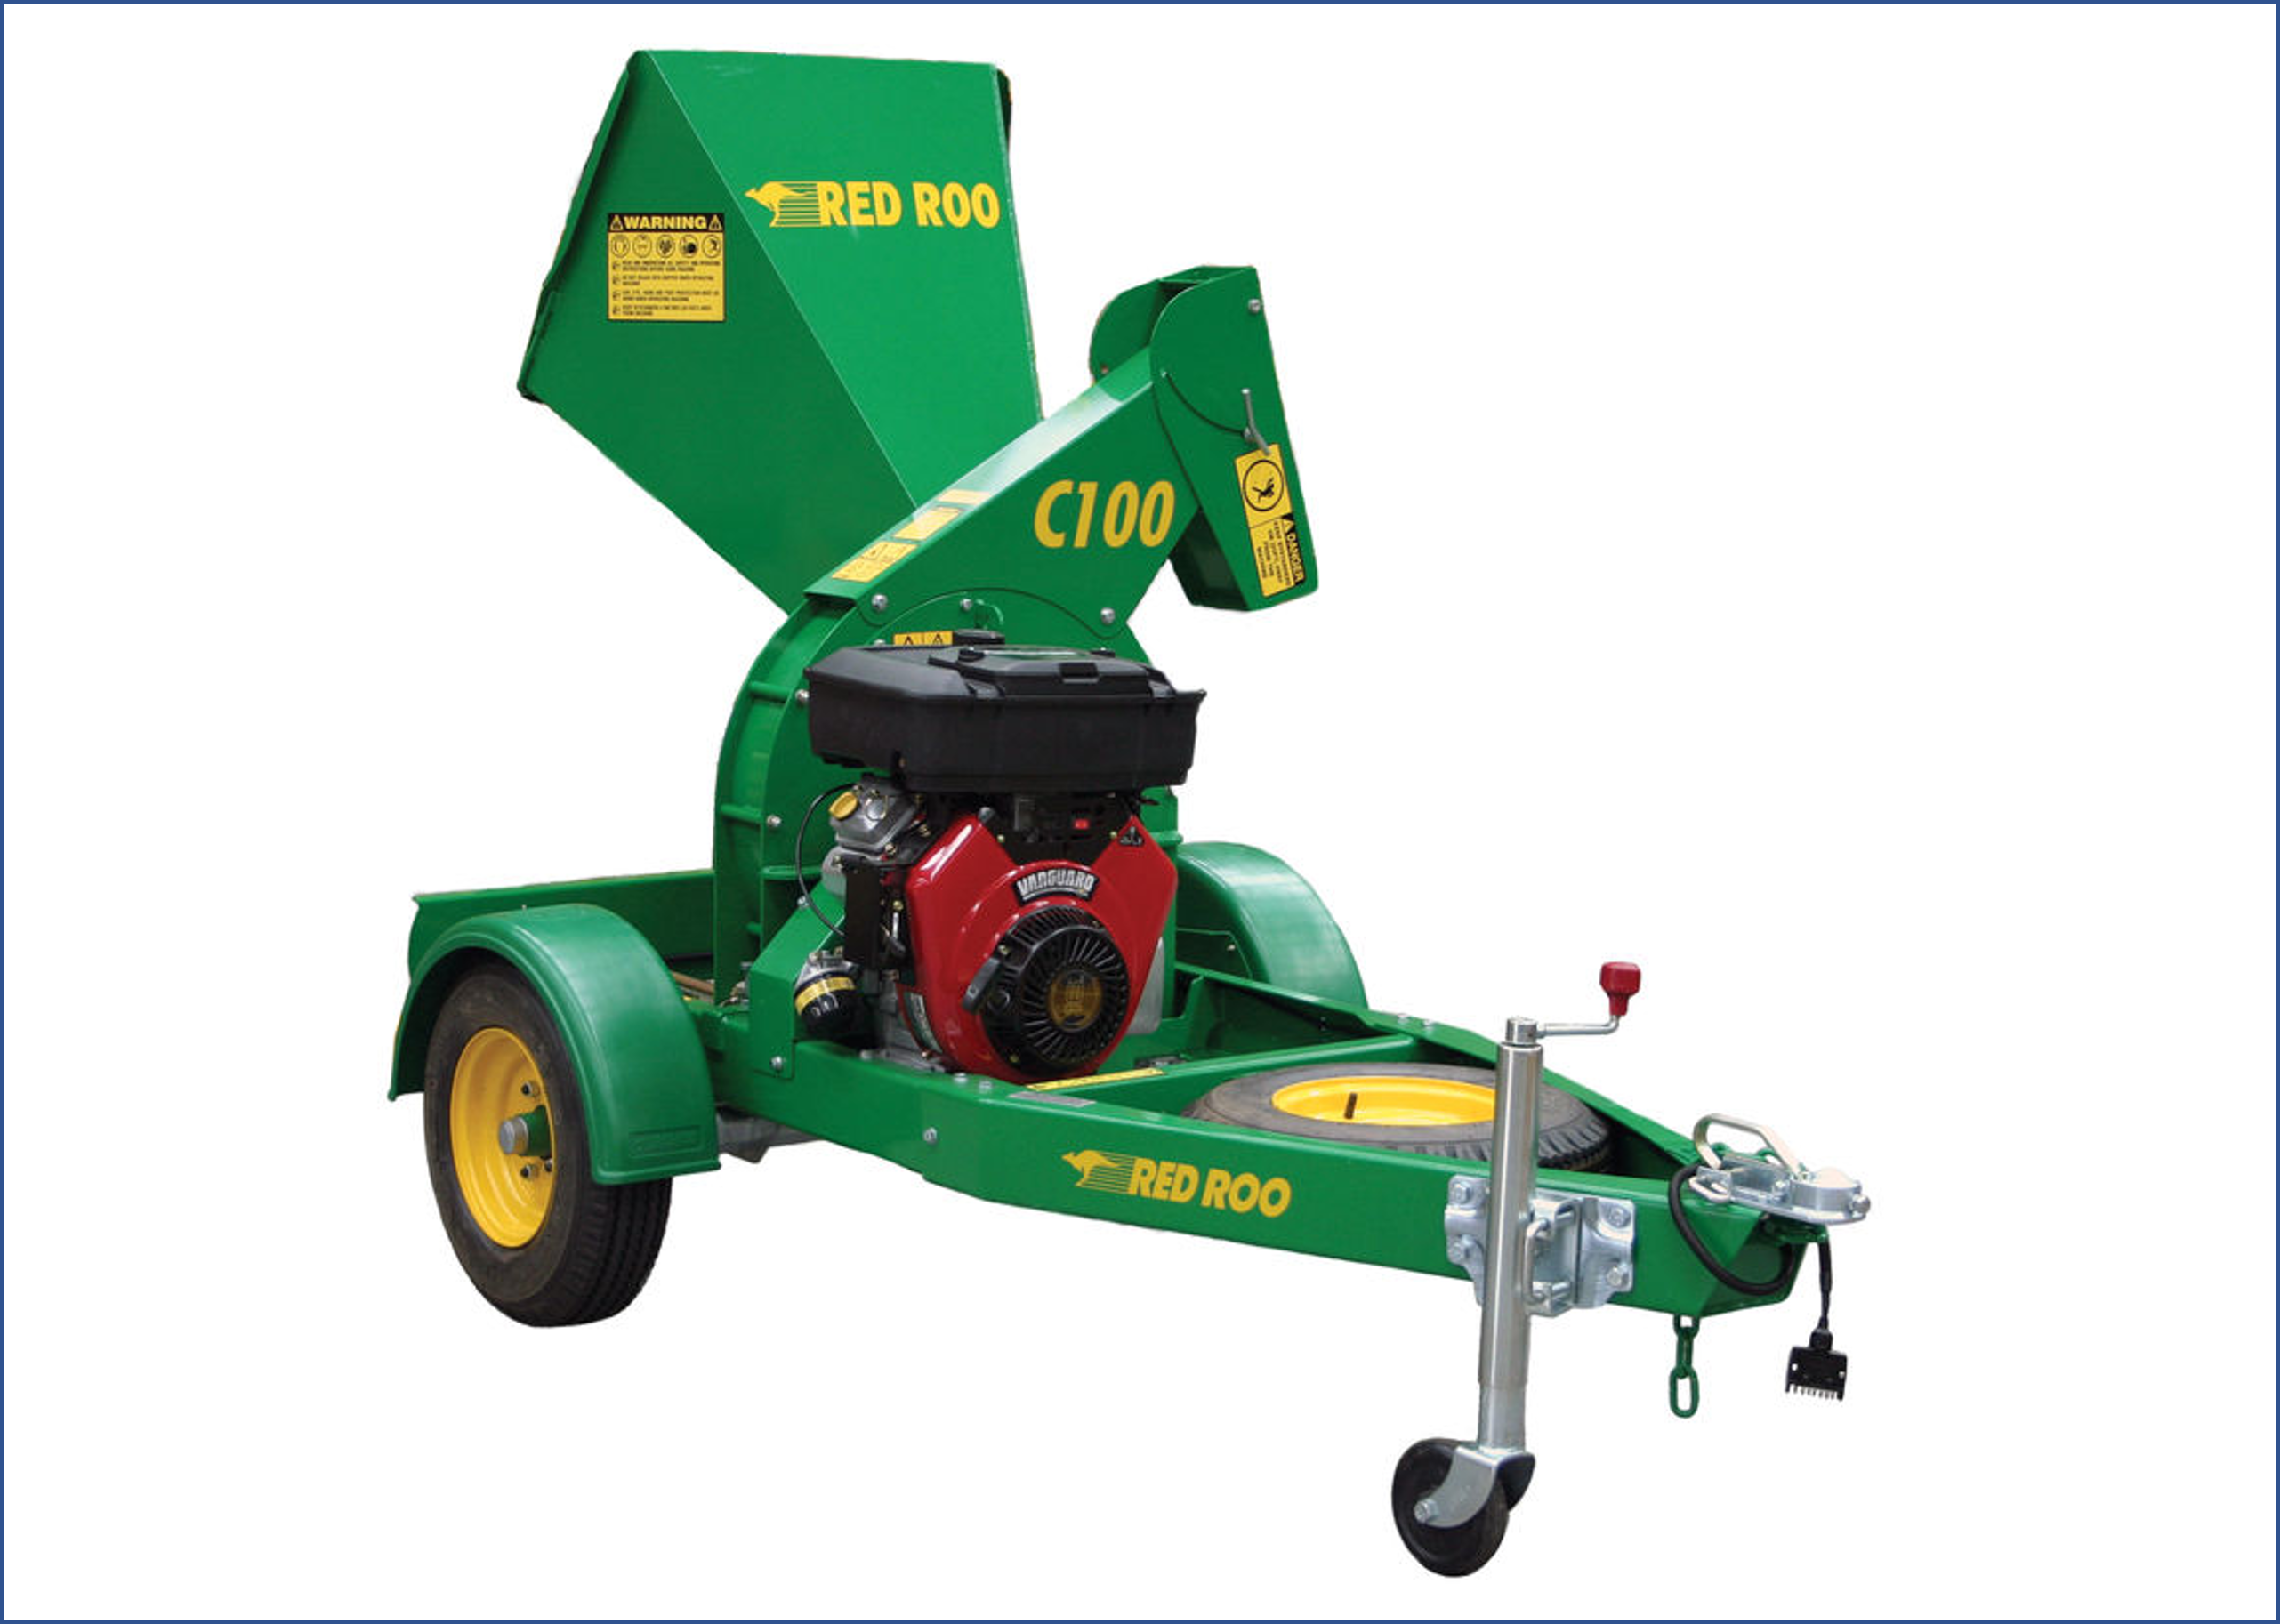 Wood Chipper - 100mm - Red Roo C100 